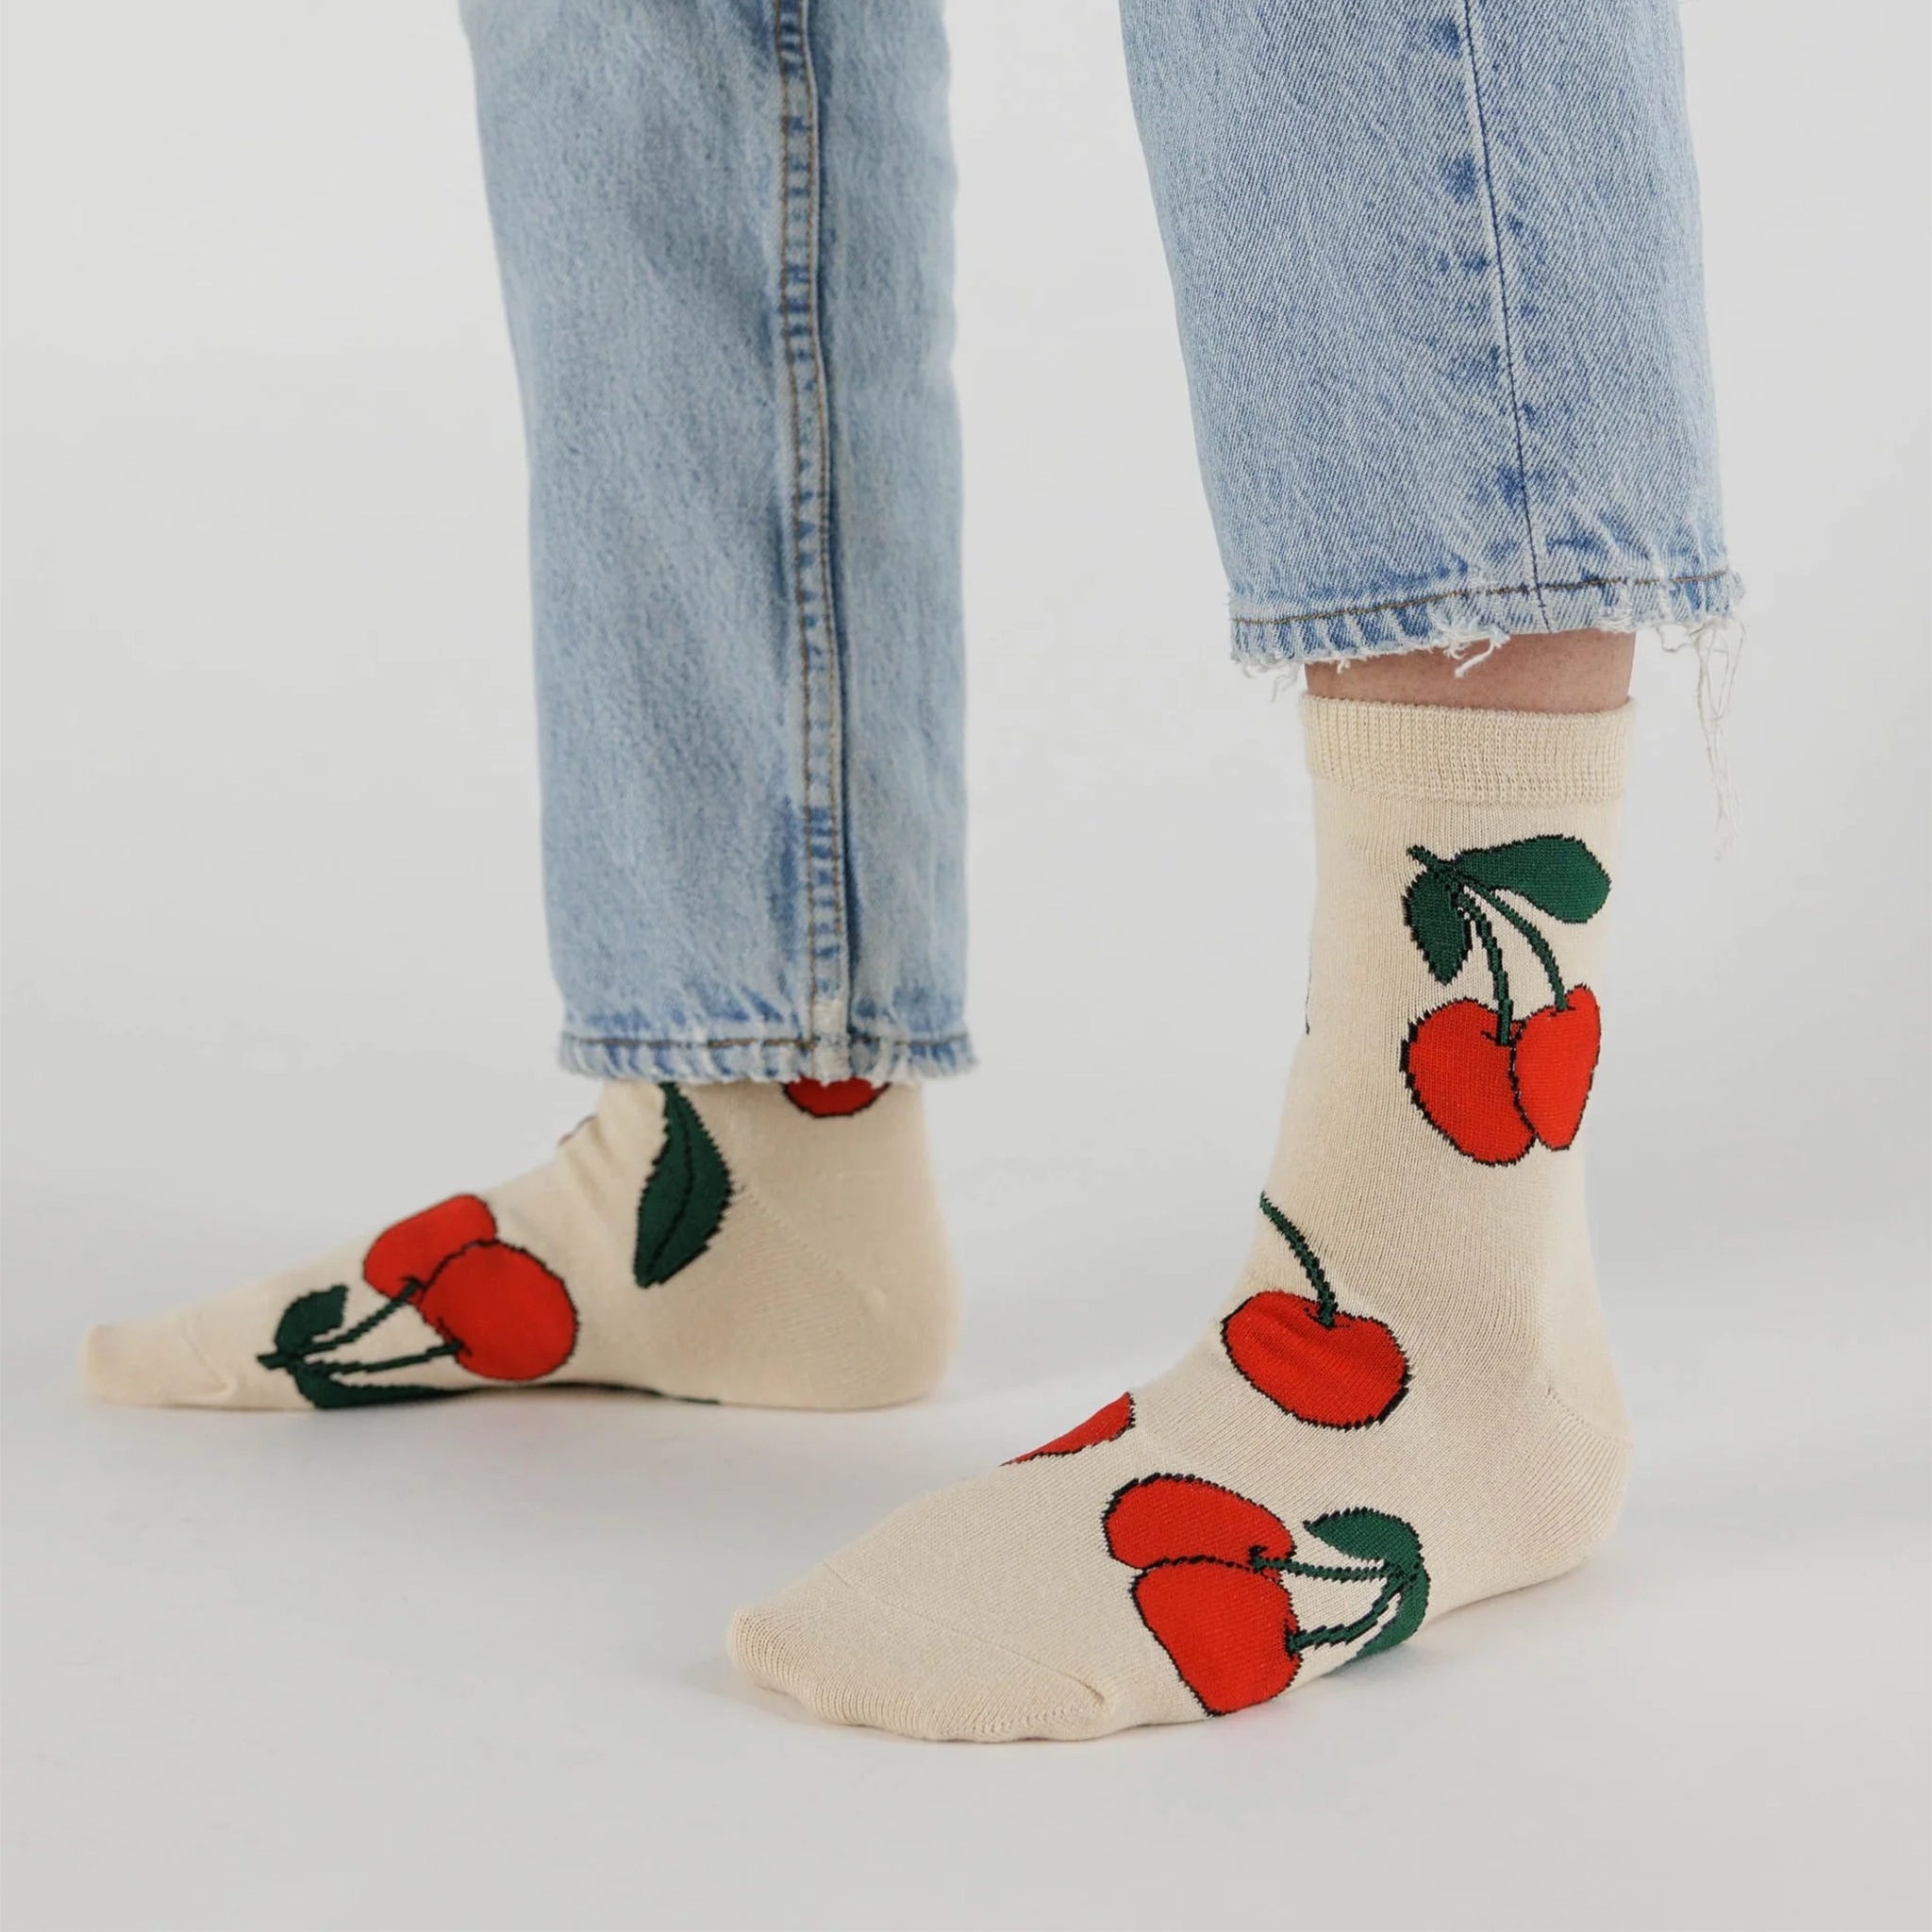 On a white background is a model wearing cream colored socks with a bright red cherries design on it along with "Baggu" on the bottom of the foot.